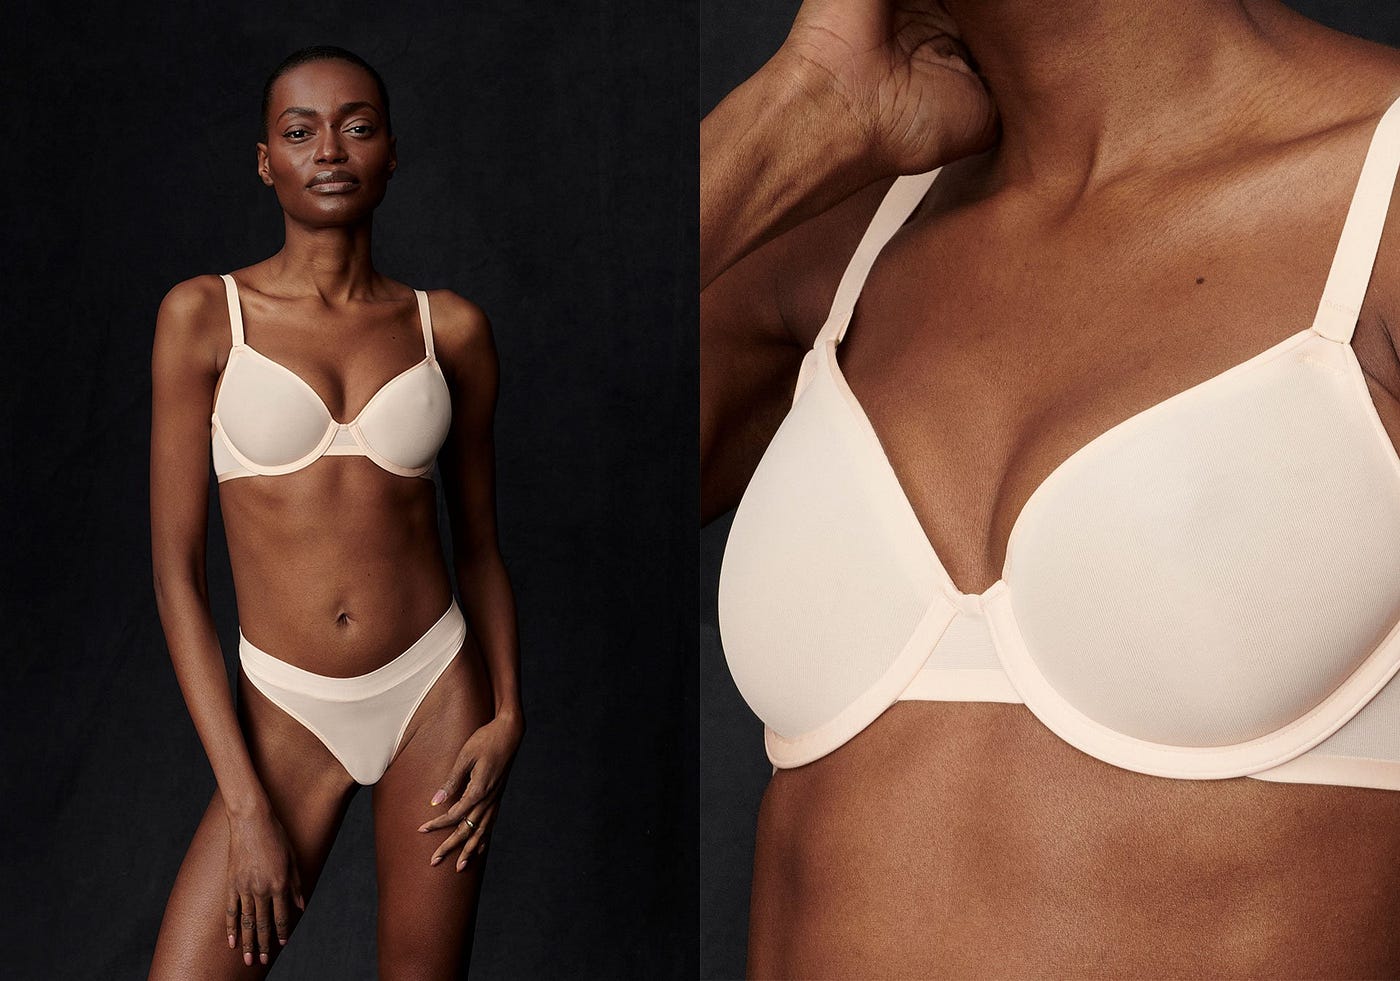 How to Find Stylish, Sensual Bras without Sacrificing Comfort, by CUUP